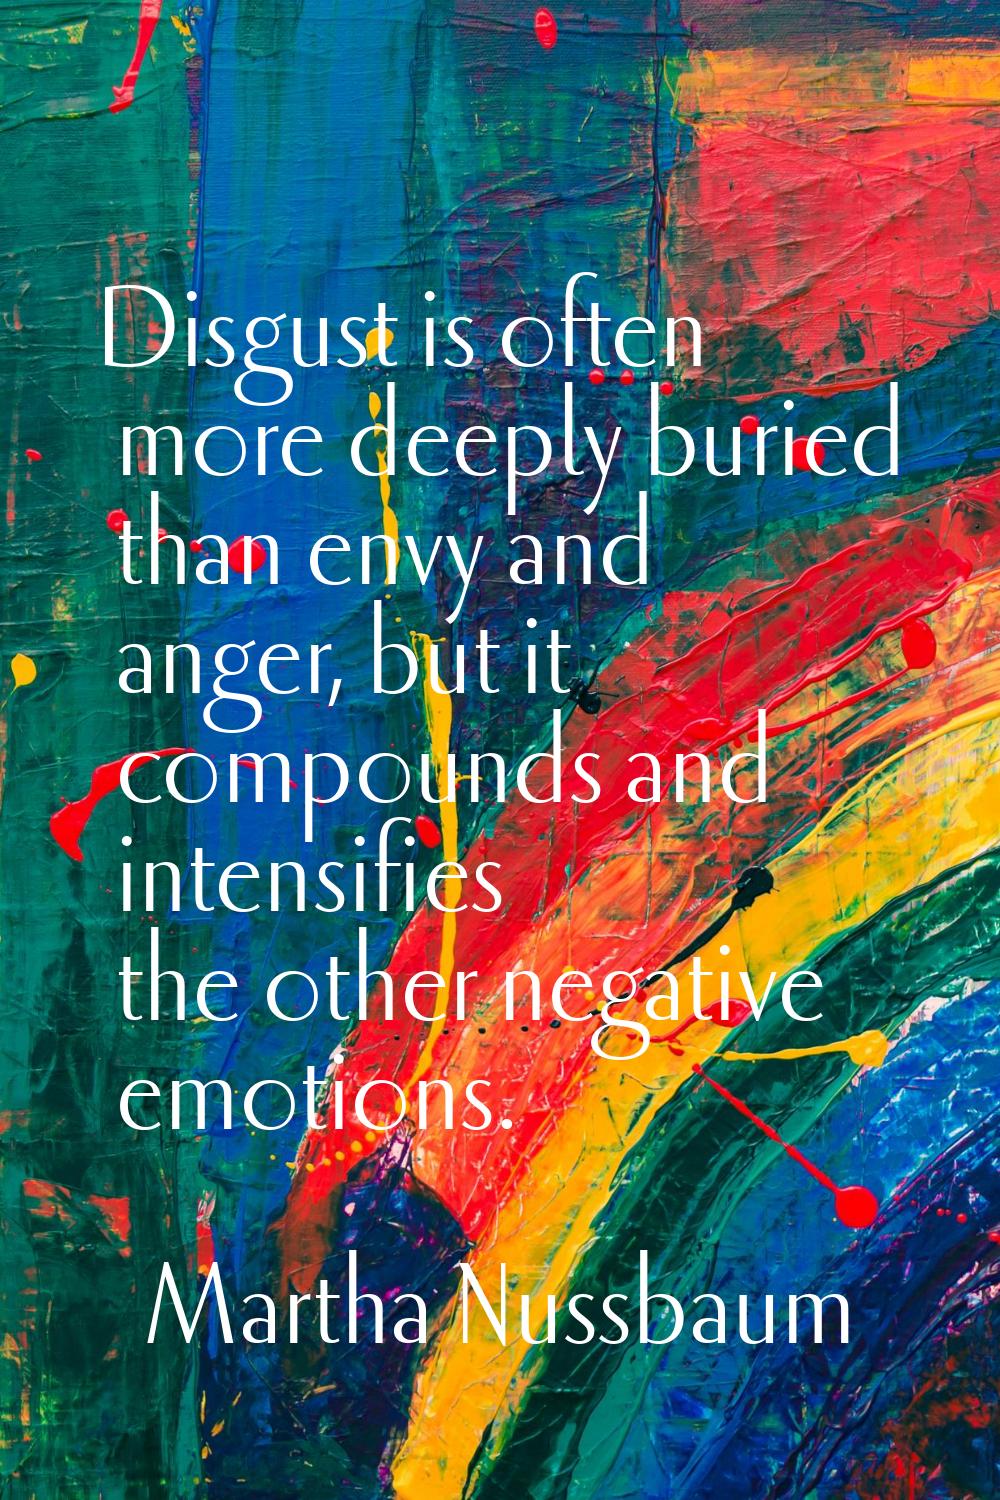 Disgust is often more deeply buried than envy and anger, but it compounds and intensifies the other